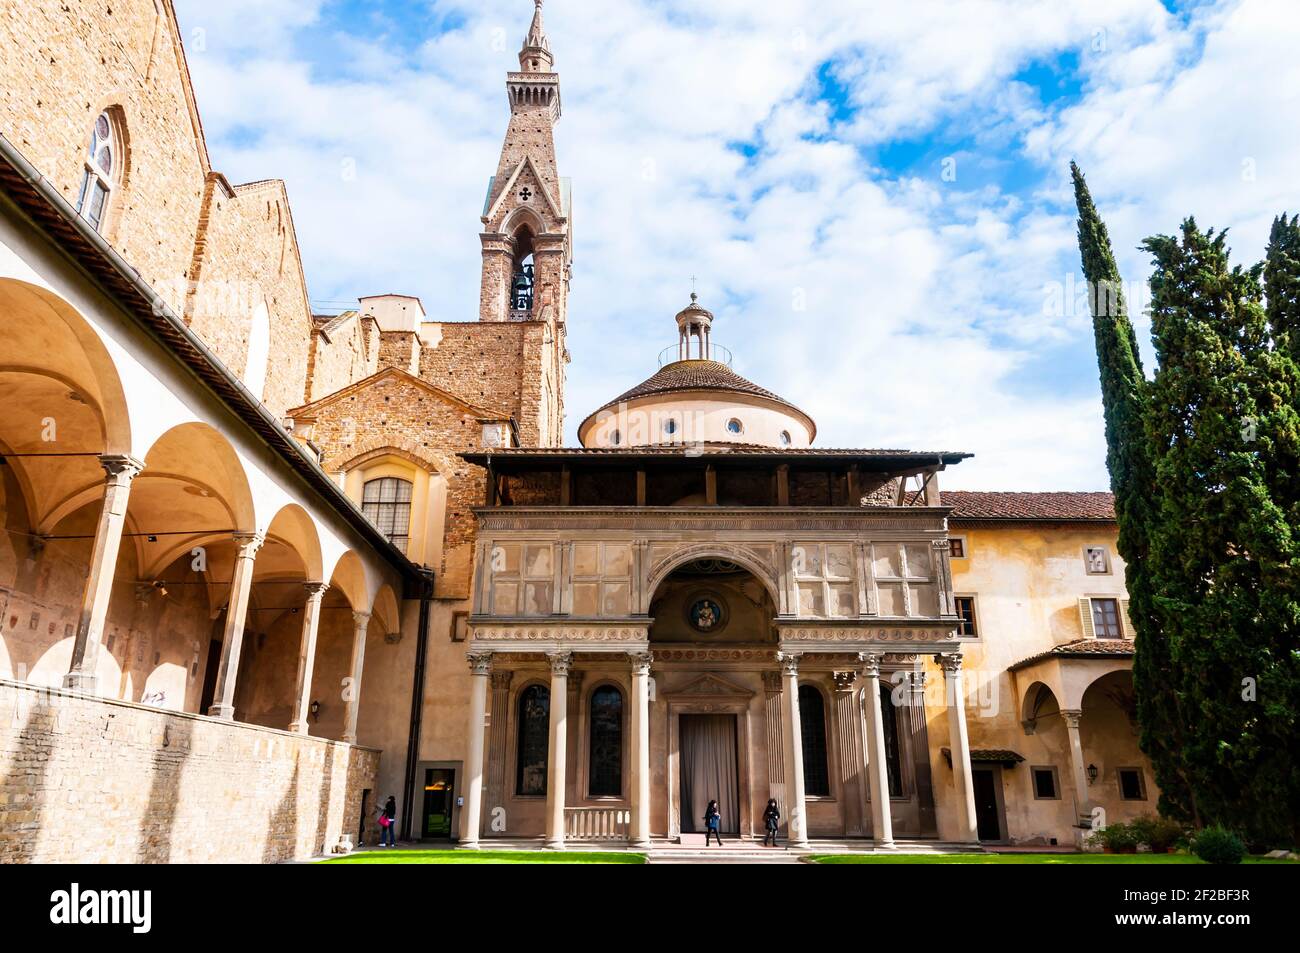 Gardens and cloister of the Basilica Santa Croce in Florence in Tuscany, Italy Stock Photo